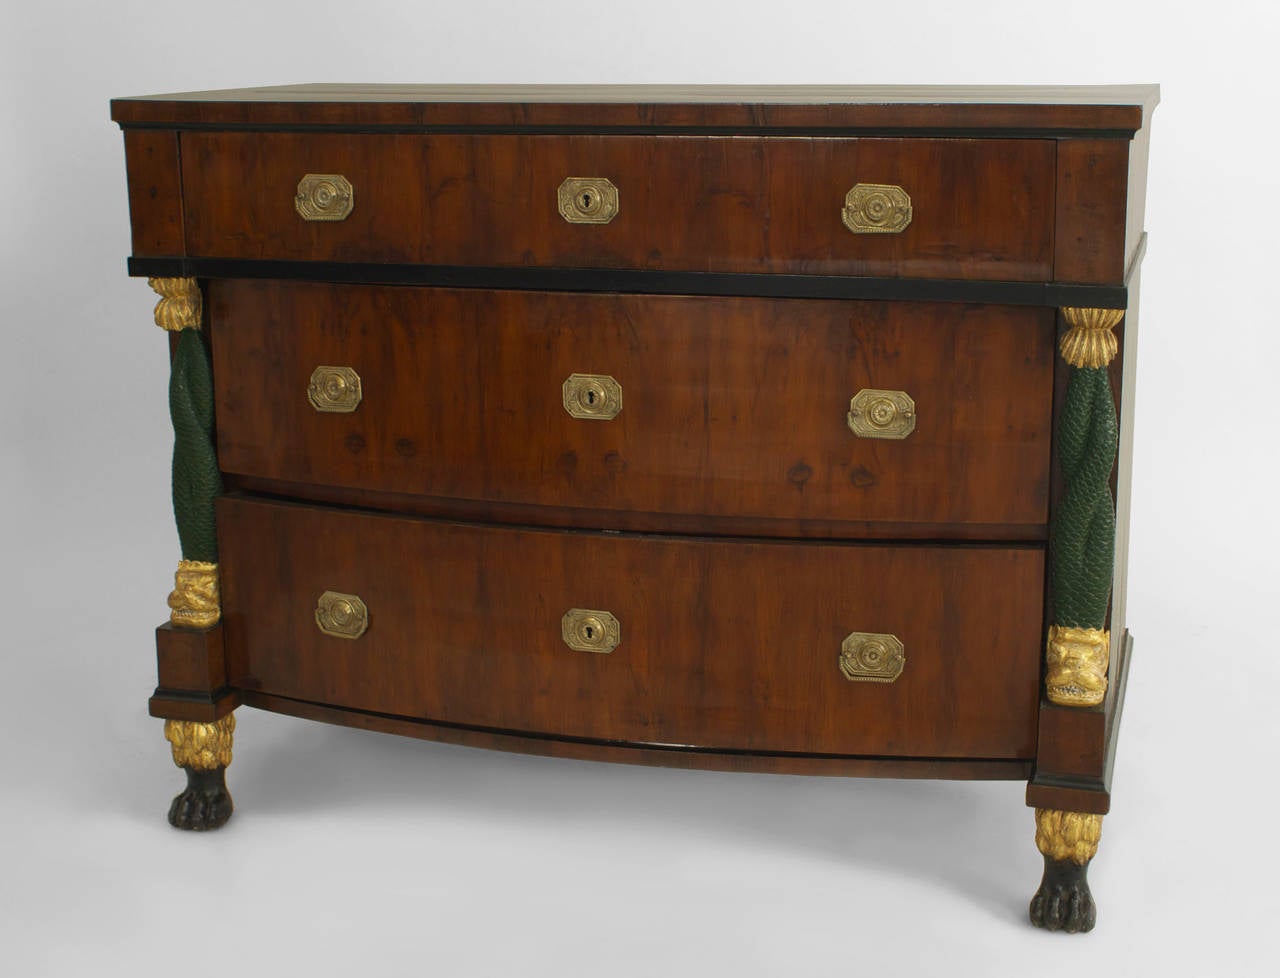 Pair of early-mid 19th century Continental Baltic mahogany bow front three-drawer
chests with ebonized trim and carved gilt and green painted dolphin sides with claw feet.